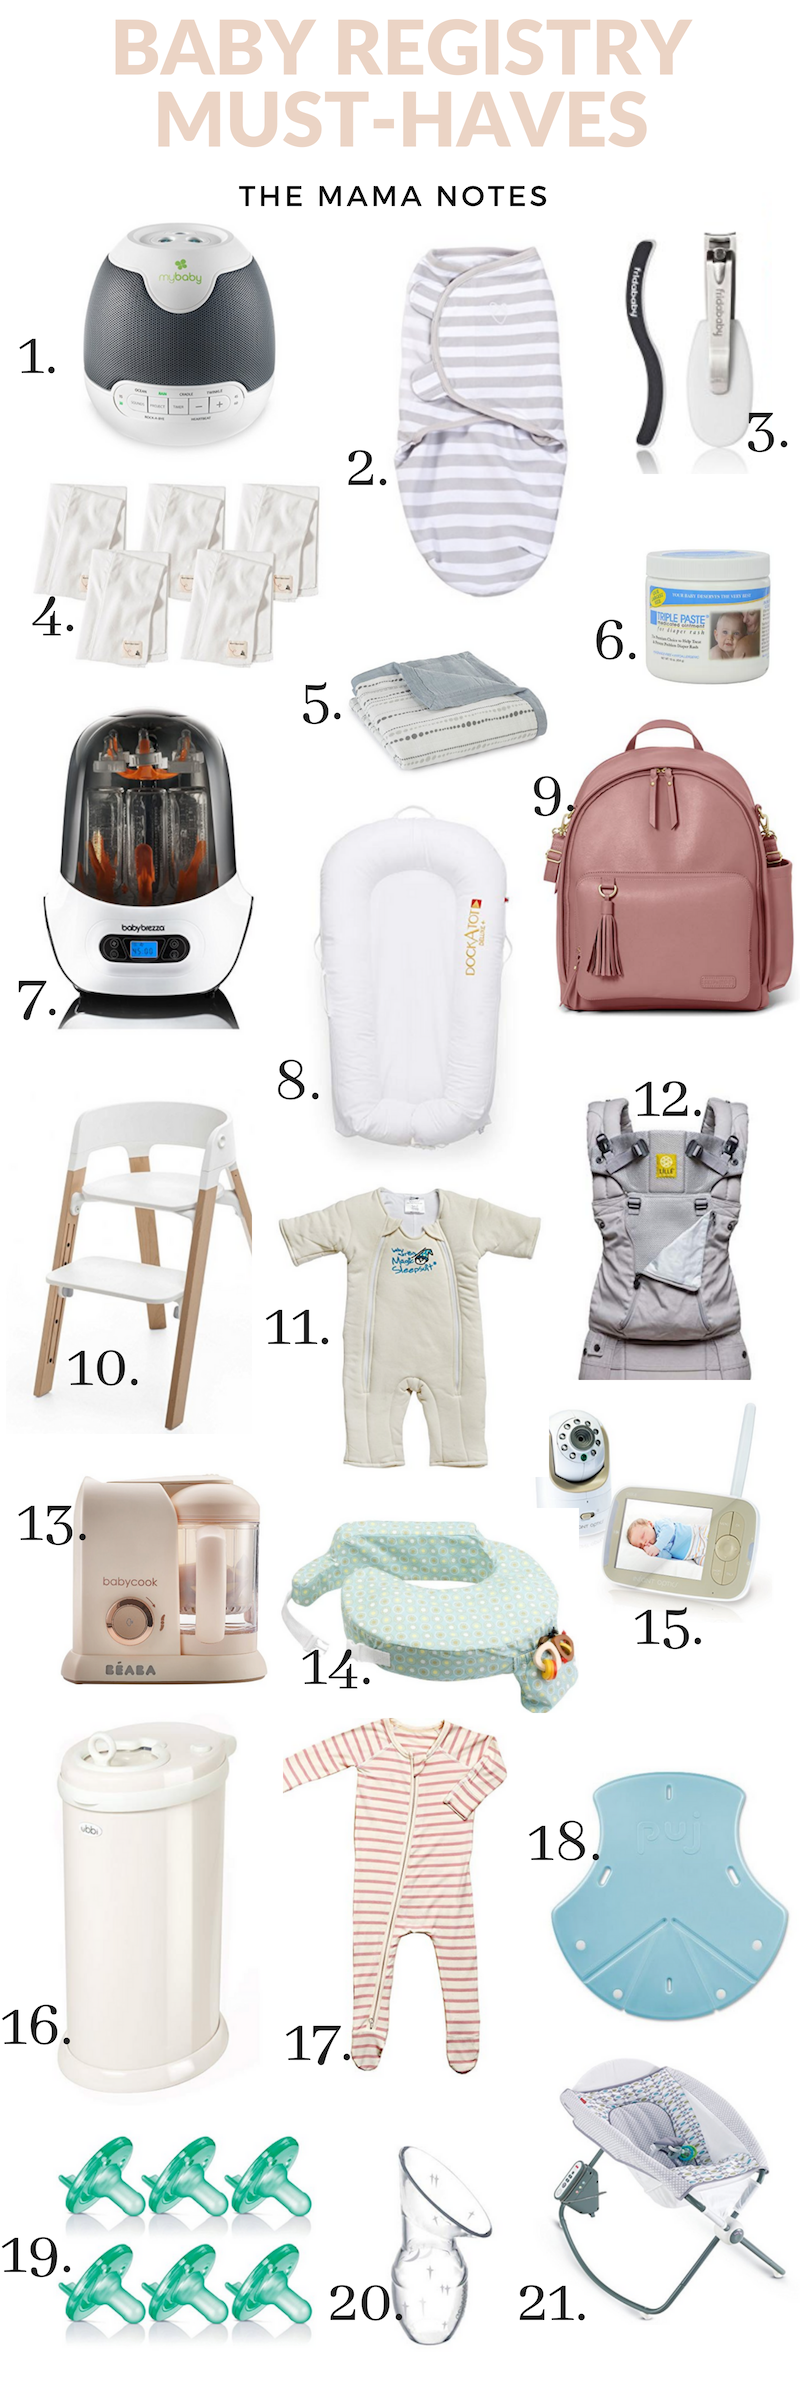 https://themamanotes.com/wp-content/uploads/2017/02/baby-registry-after-2-.png